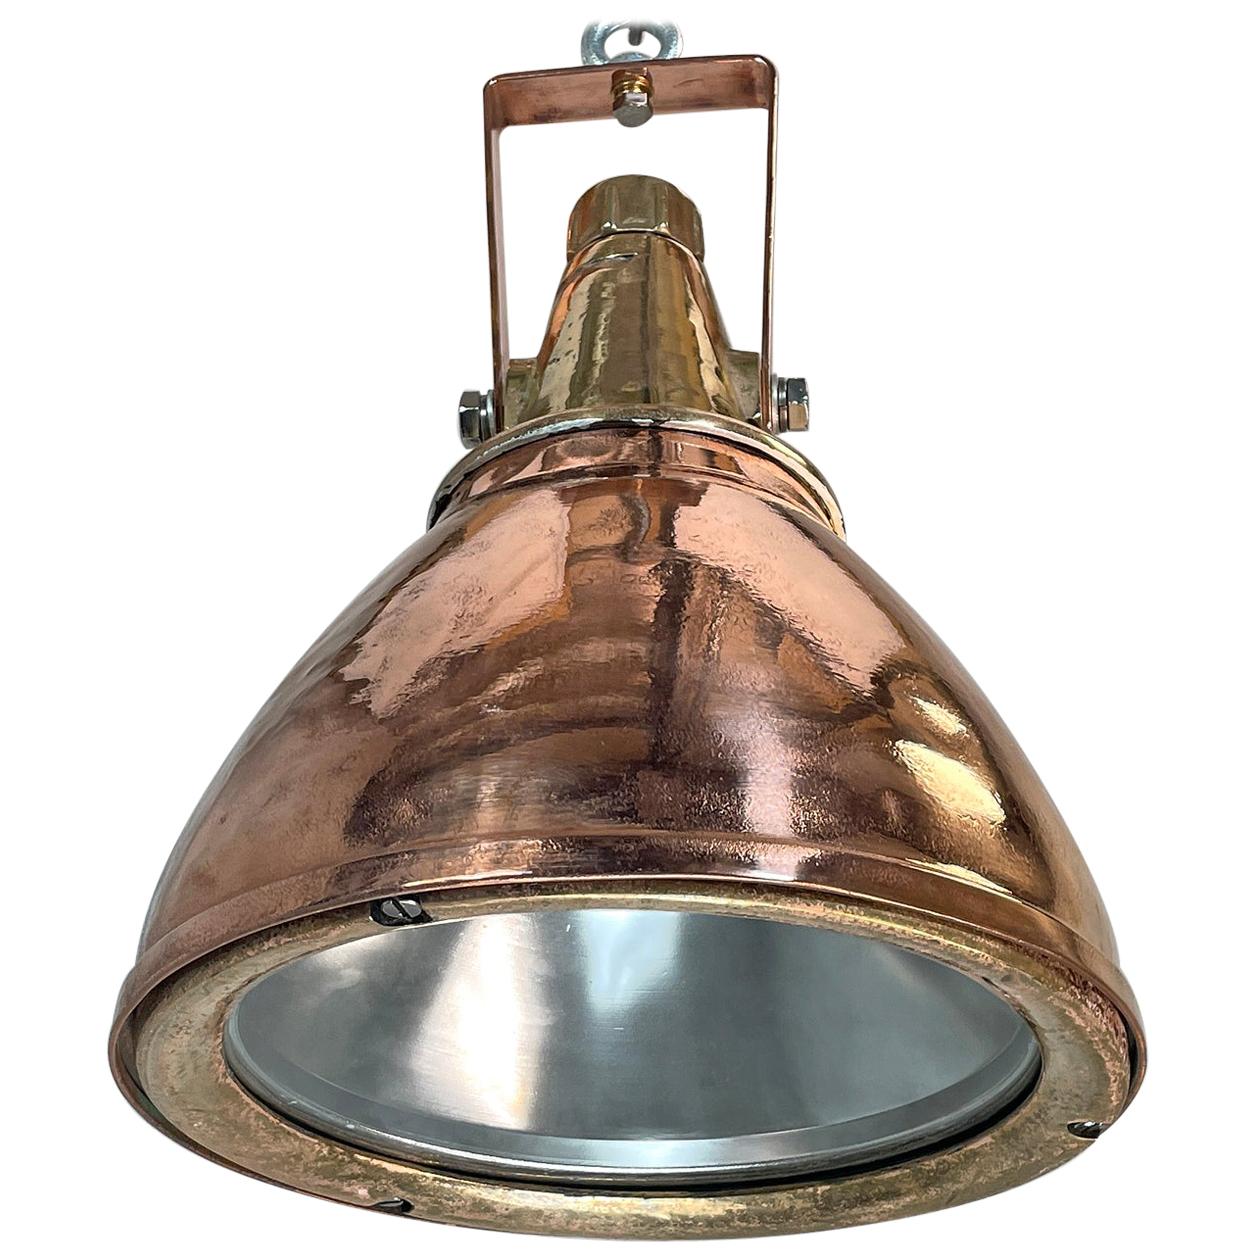 1970s German Copper & Brass Industrial Ceiling Pendant Light with Beam Focus